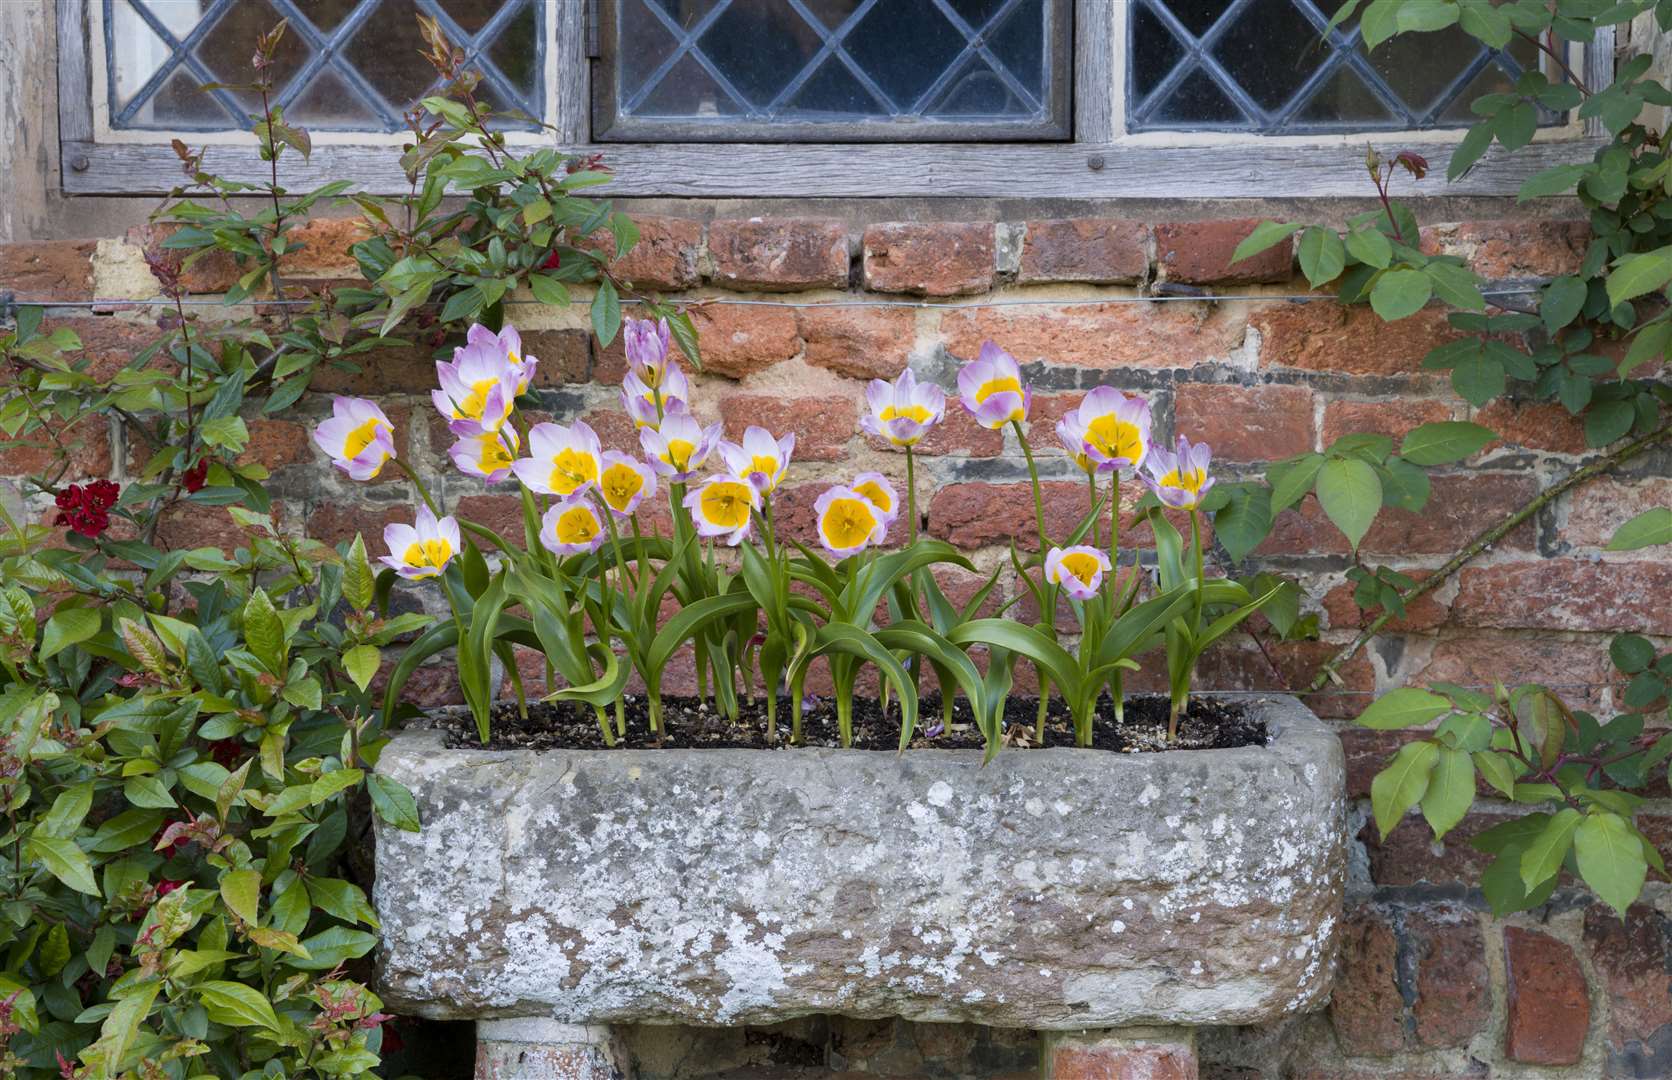 Tulips in a stone trough in the Top Courtyard in April at Sissinghurst Castle Garden